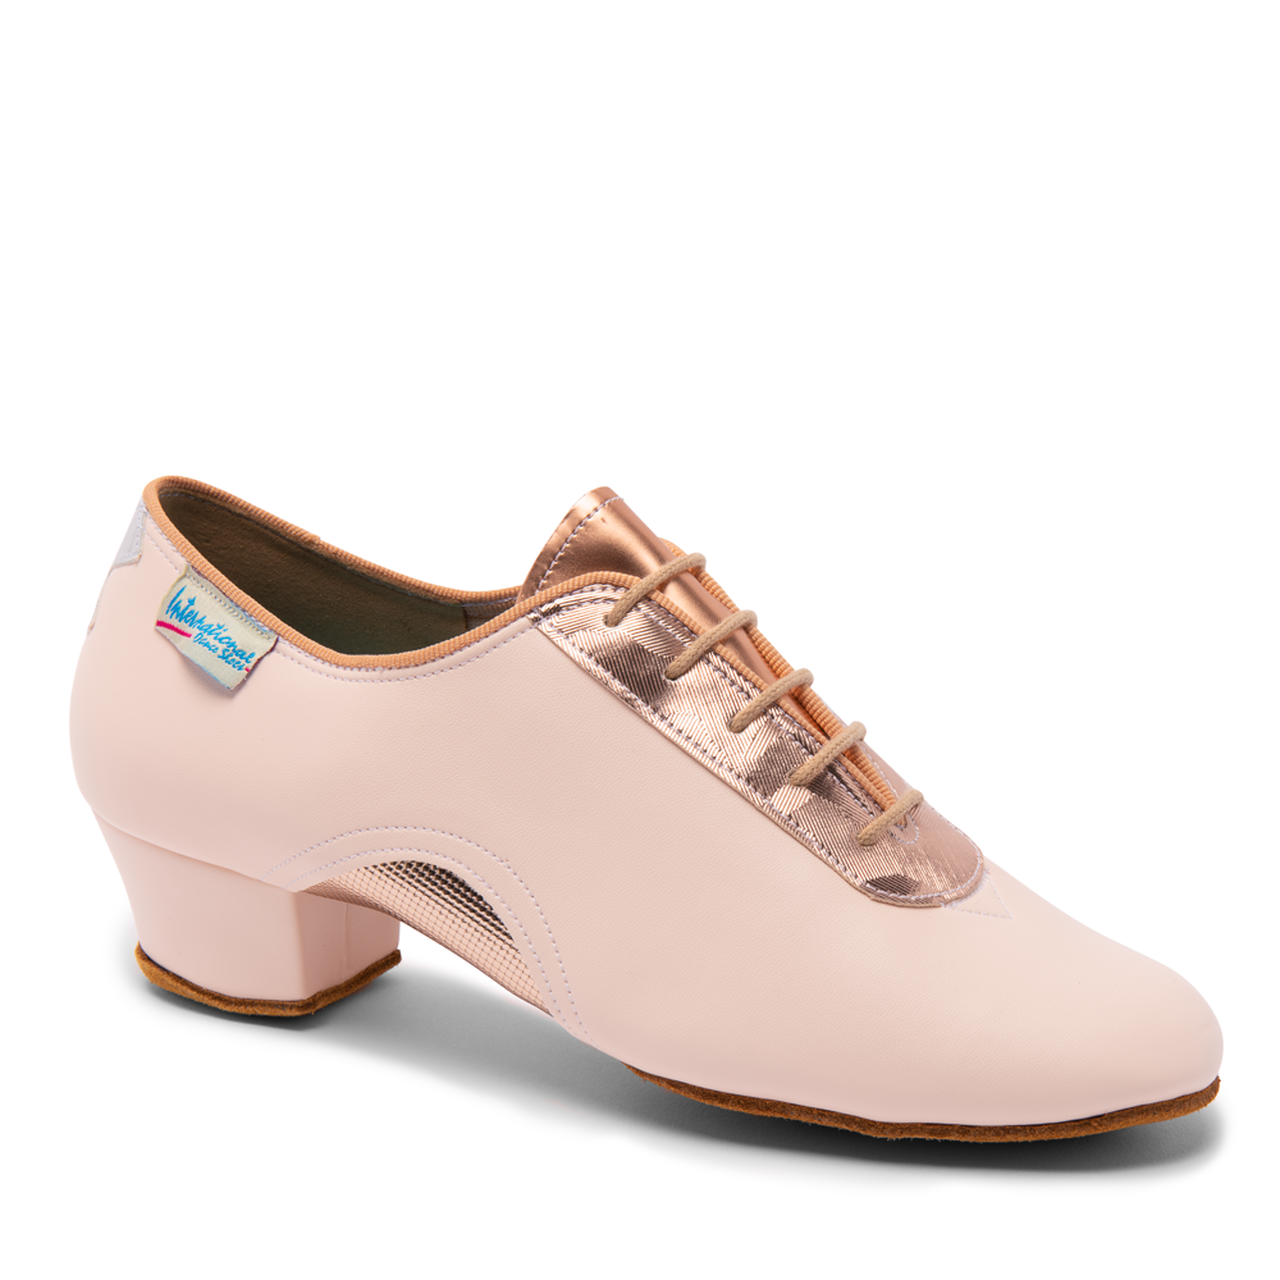 International Dance Shoes IDS Artiste SS Himalayan Rose Teaching/Practice Shoe with Metallic Rose Gold Accents in Stock